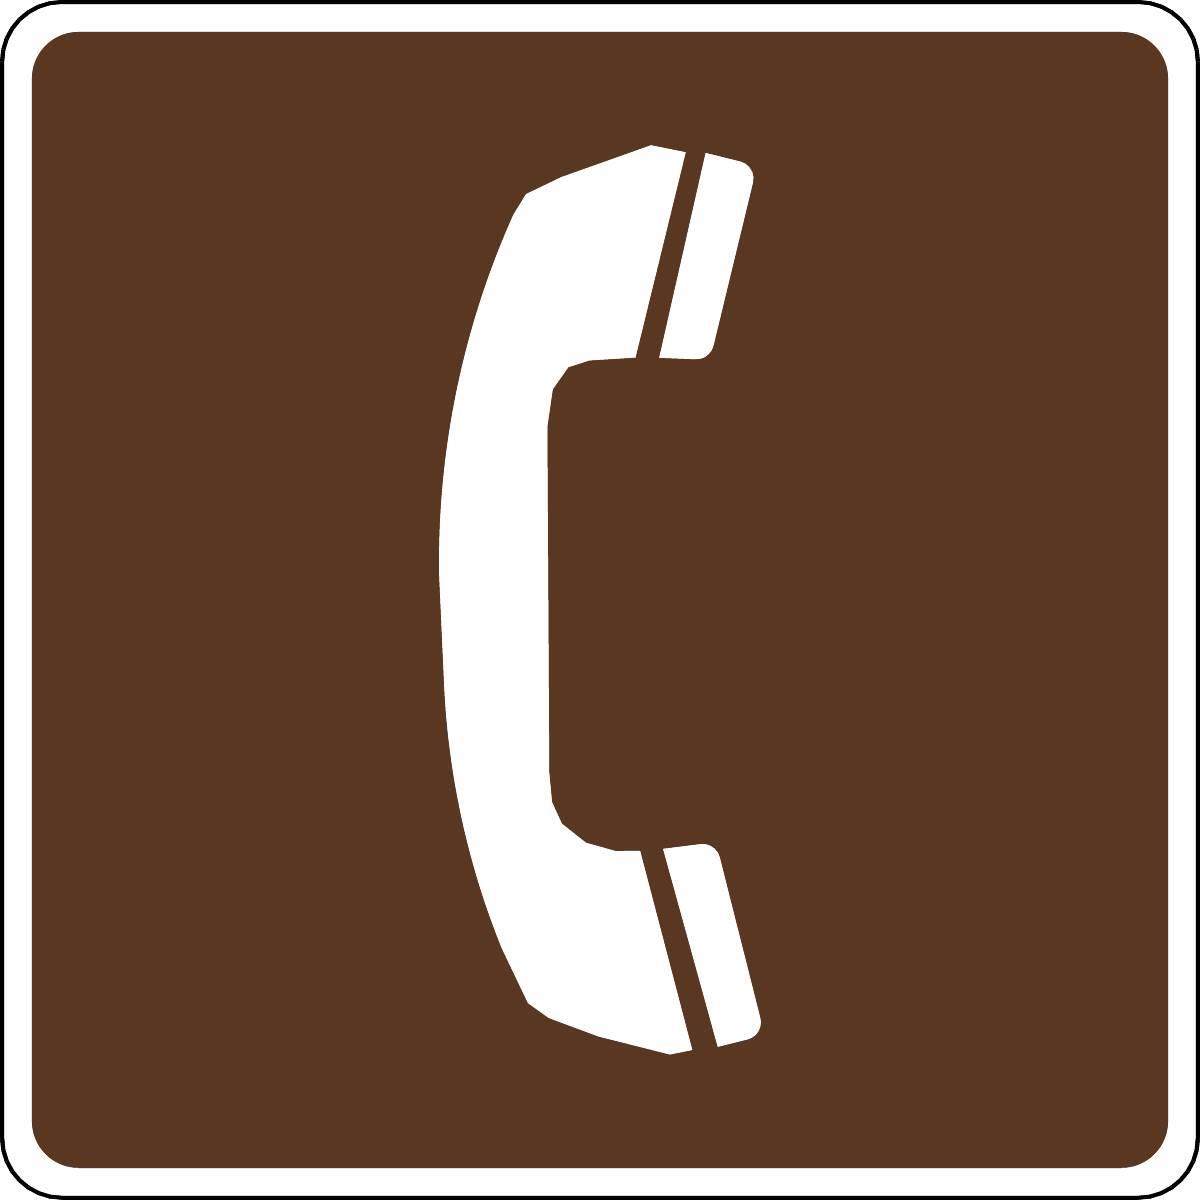 Telephone Symbol Outdoor Recreation Sign | GEMPLER'S